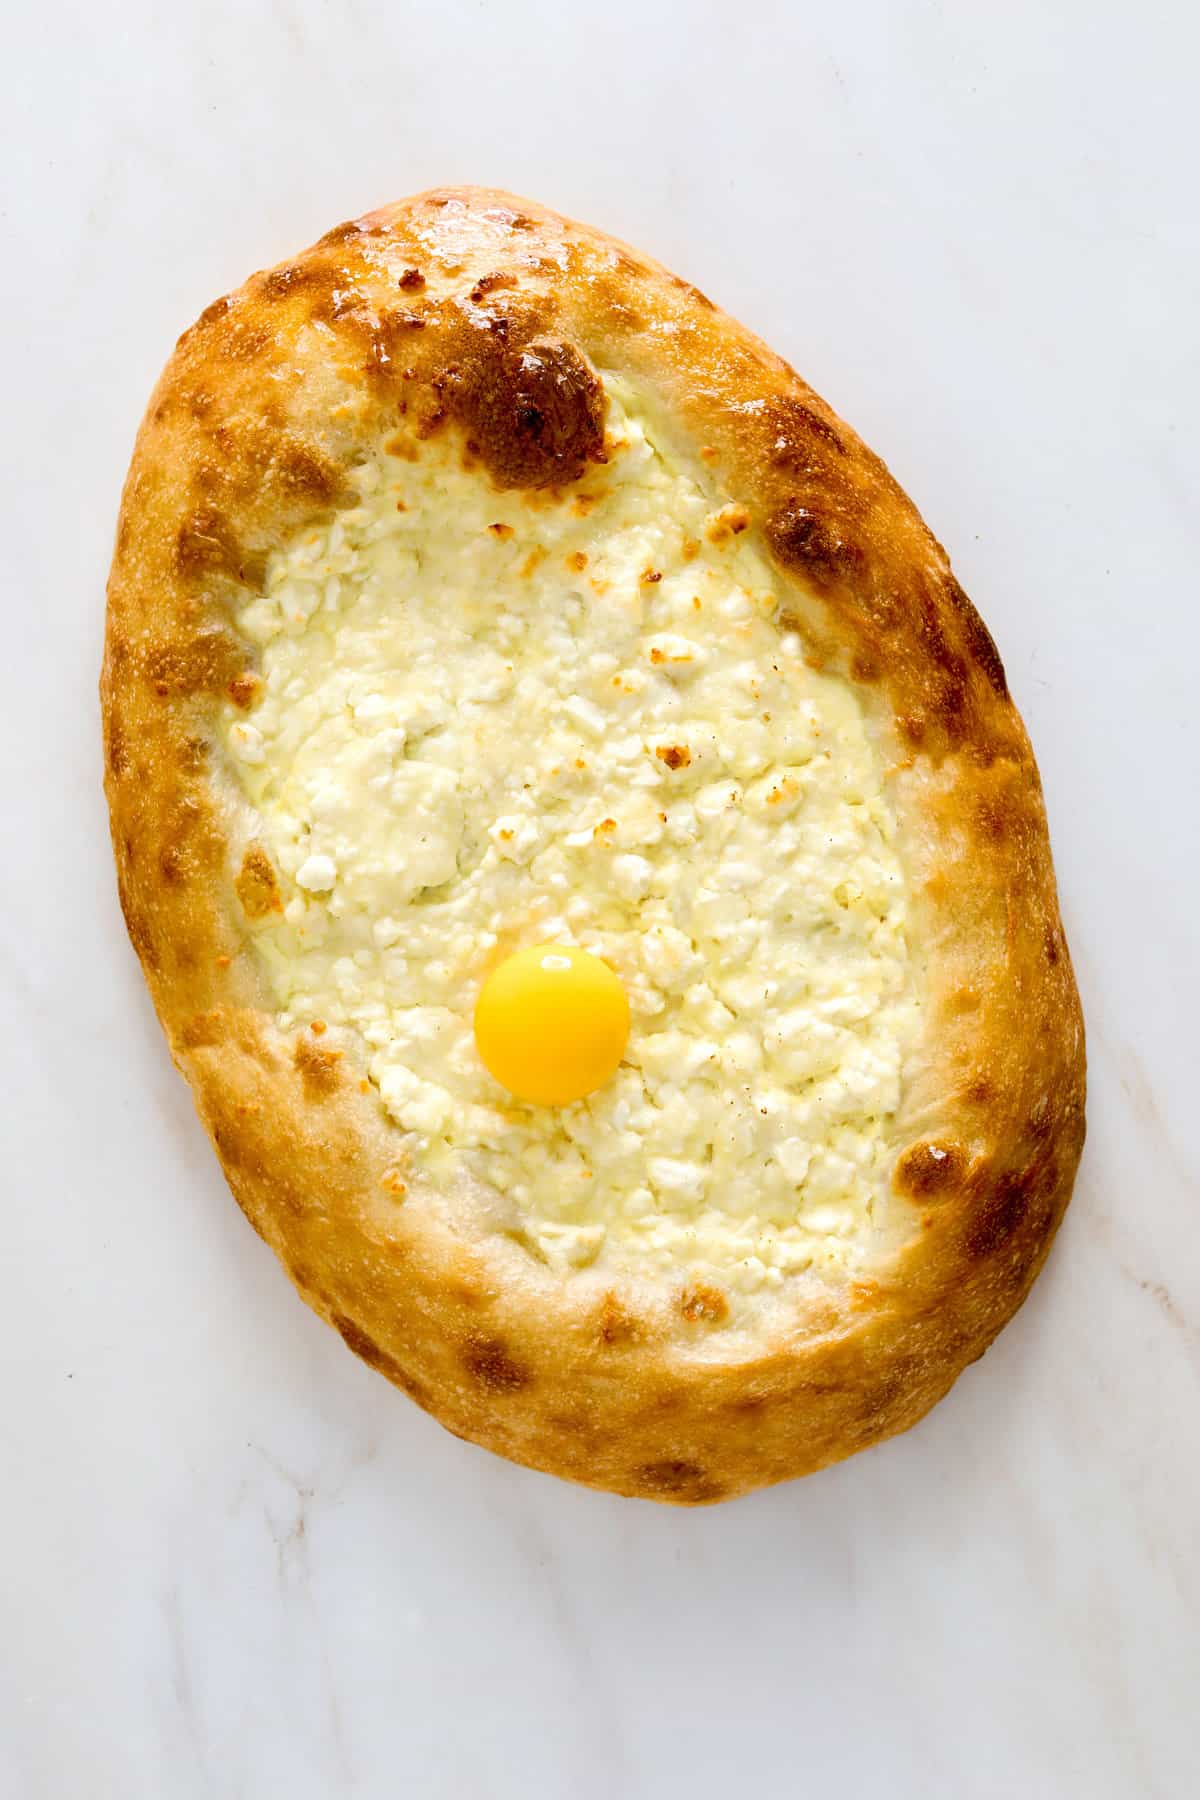 An oval pizza with golden brown crust filled with melty, white cheese and topped with an egg yolk.